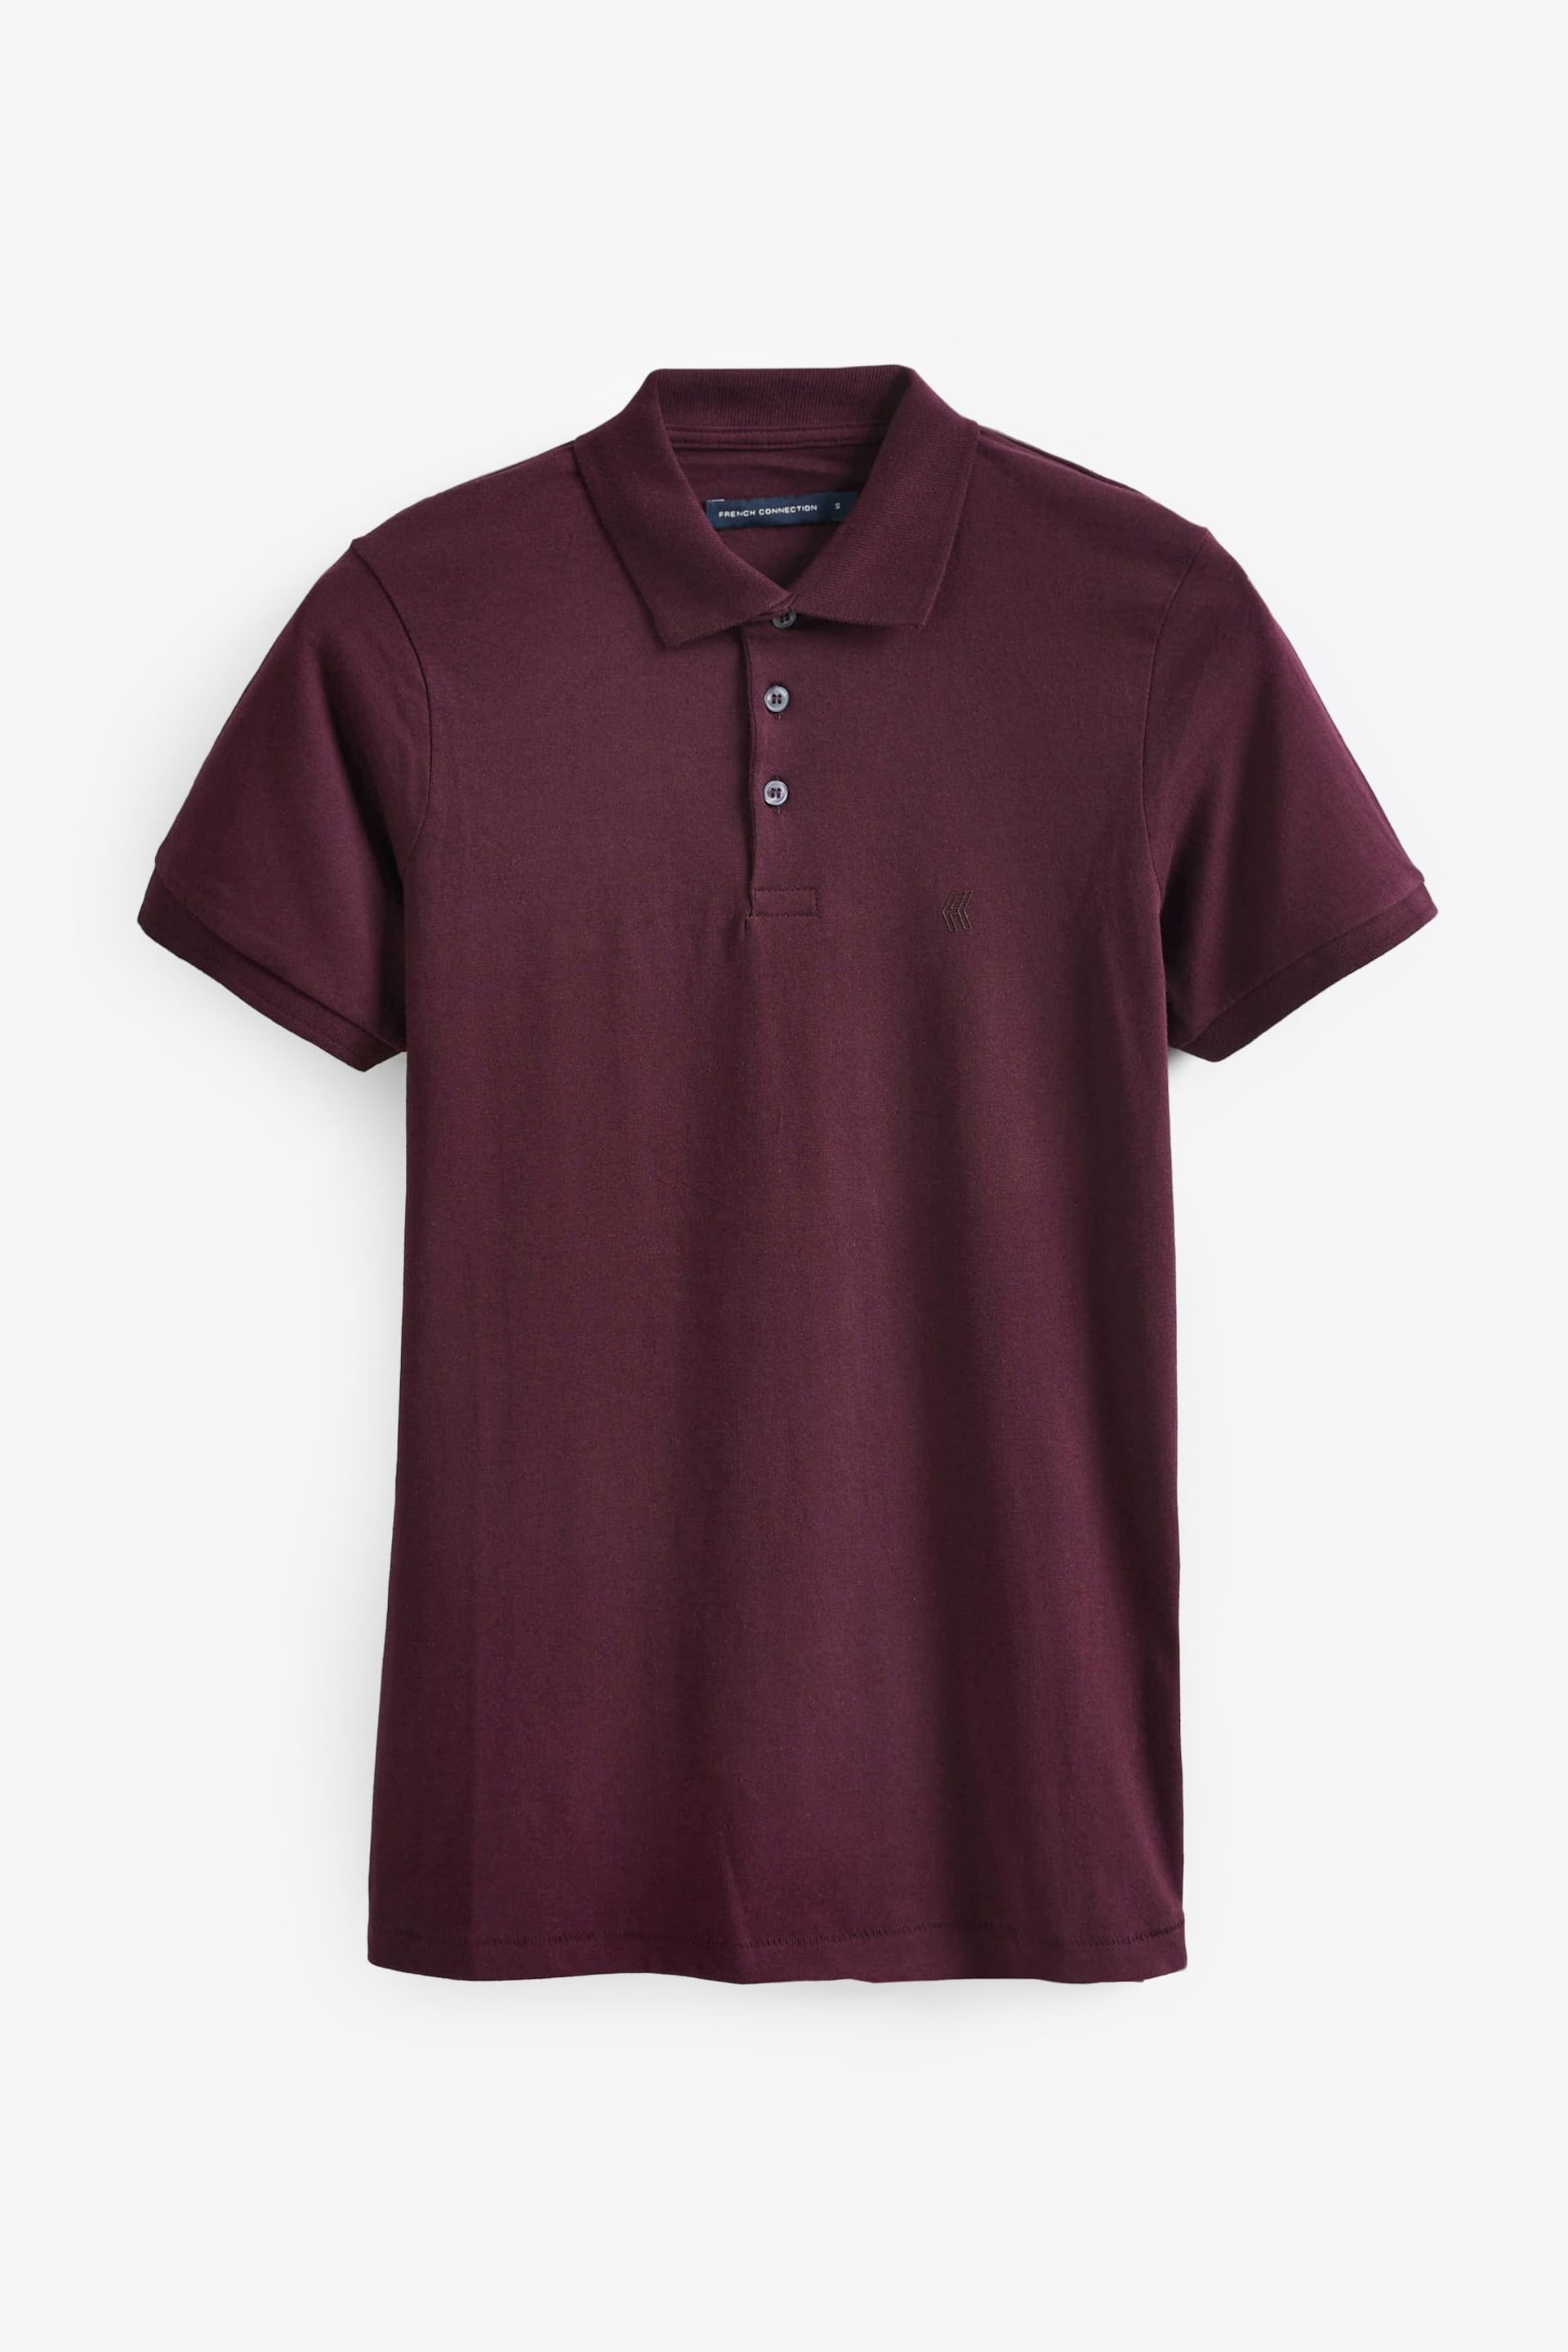 French Connection Bordeaux Polo Shirt - Image 8 of 8